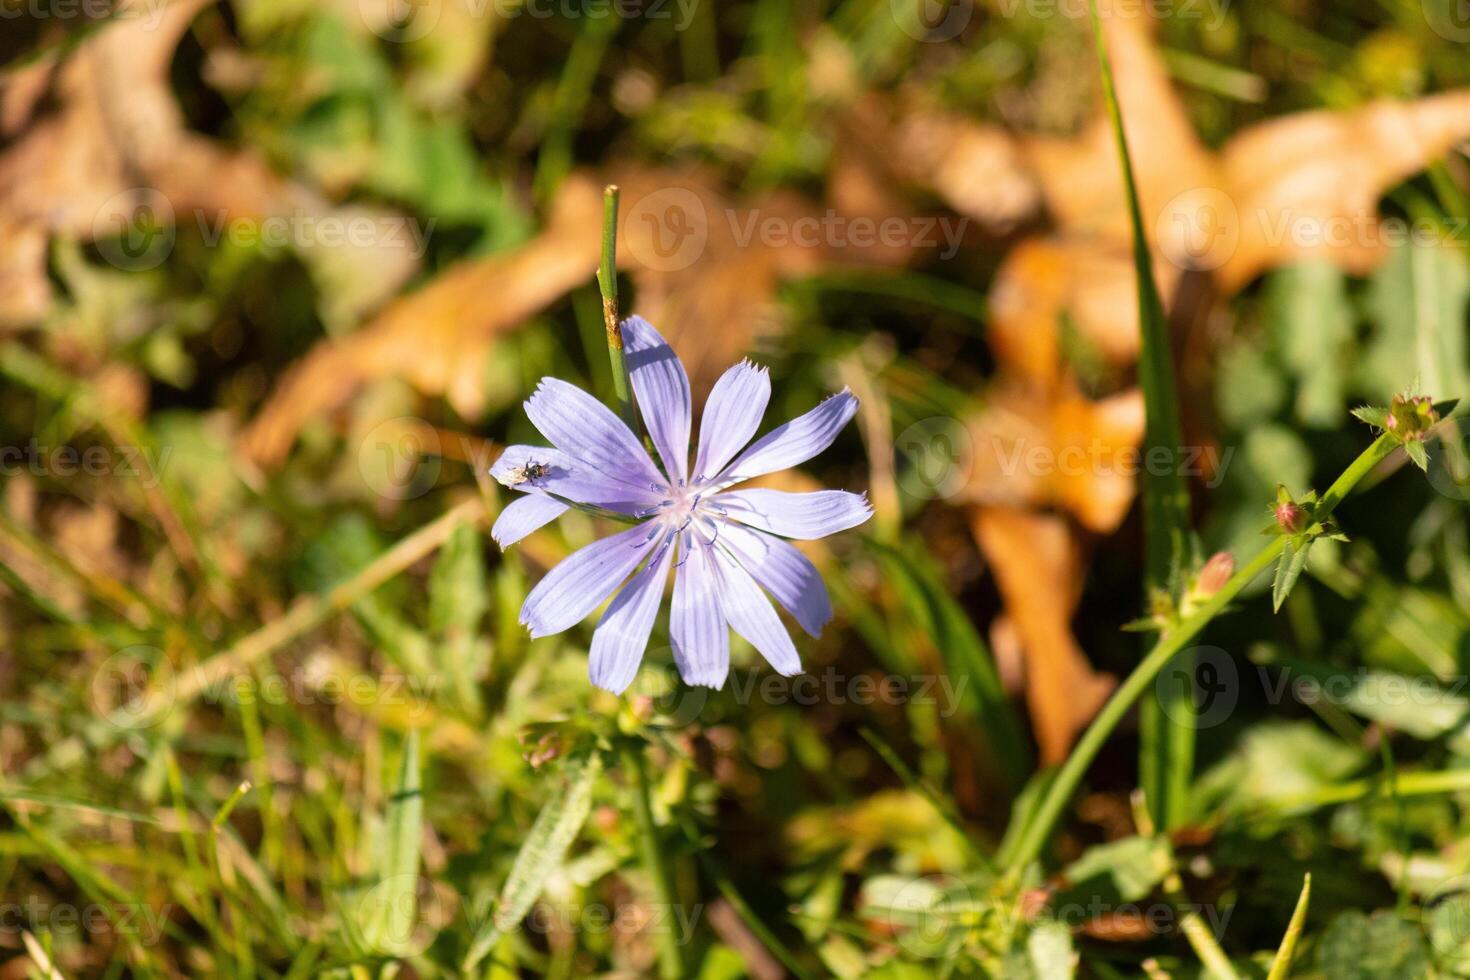 This beautiful chicory wildflower sat in the meadow among all the brown foliage. The purple splash of color among the Fall colored grass. I love the long petals that almost have a daisy look. photo